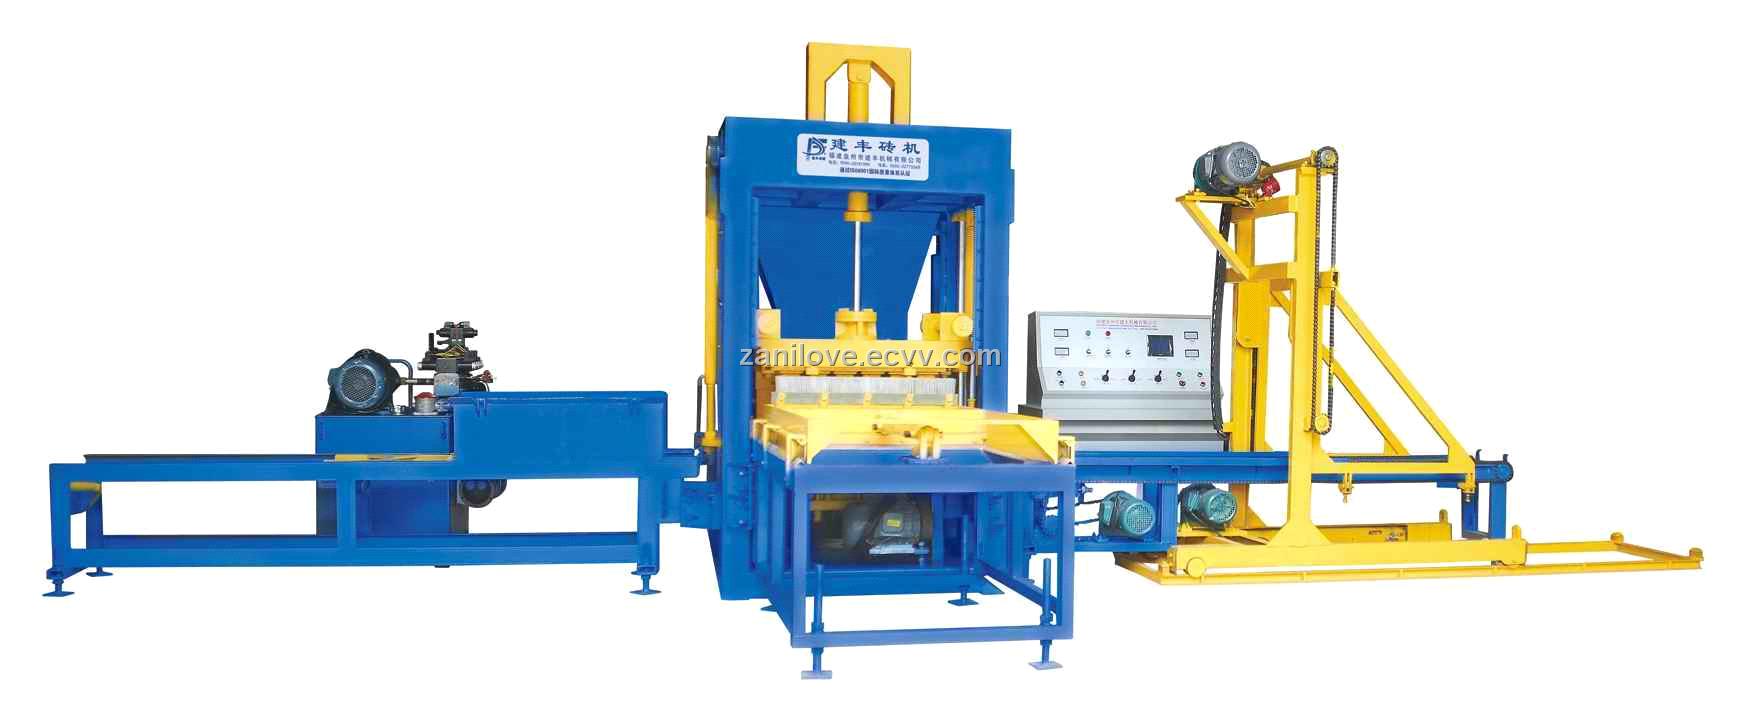 cement block making machine from China Manufacturer, Manufactory